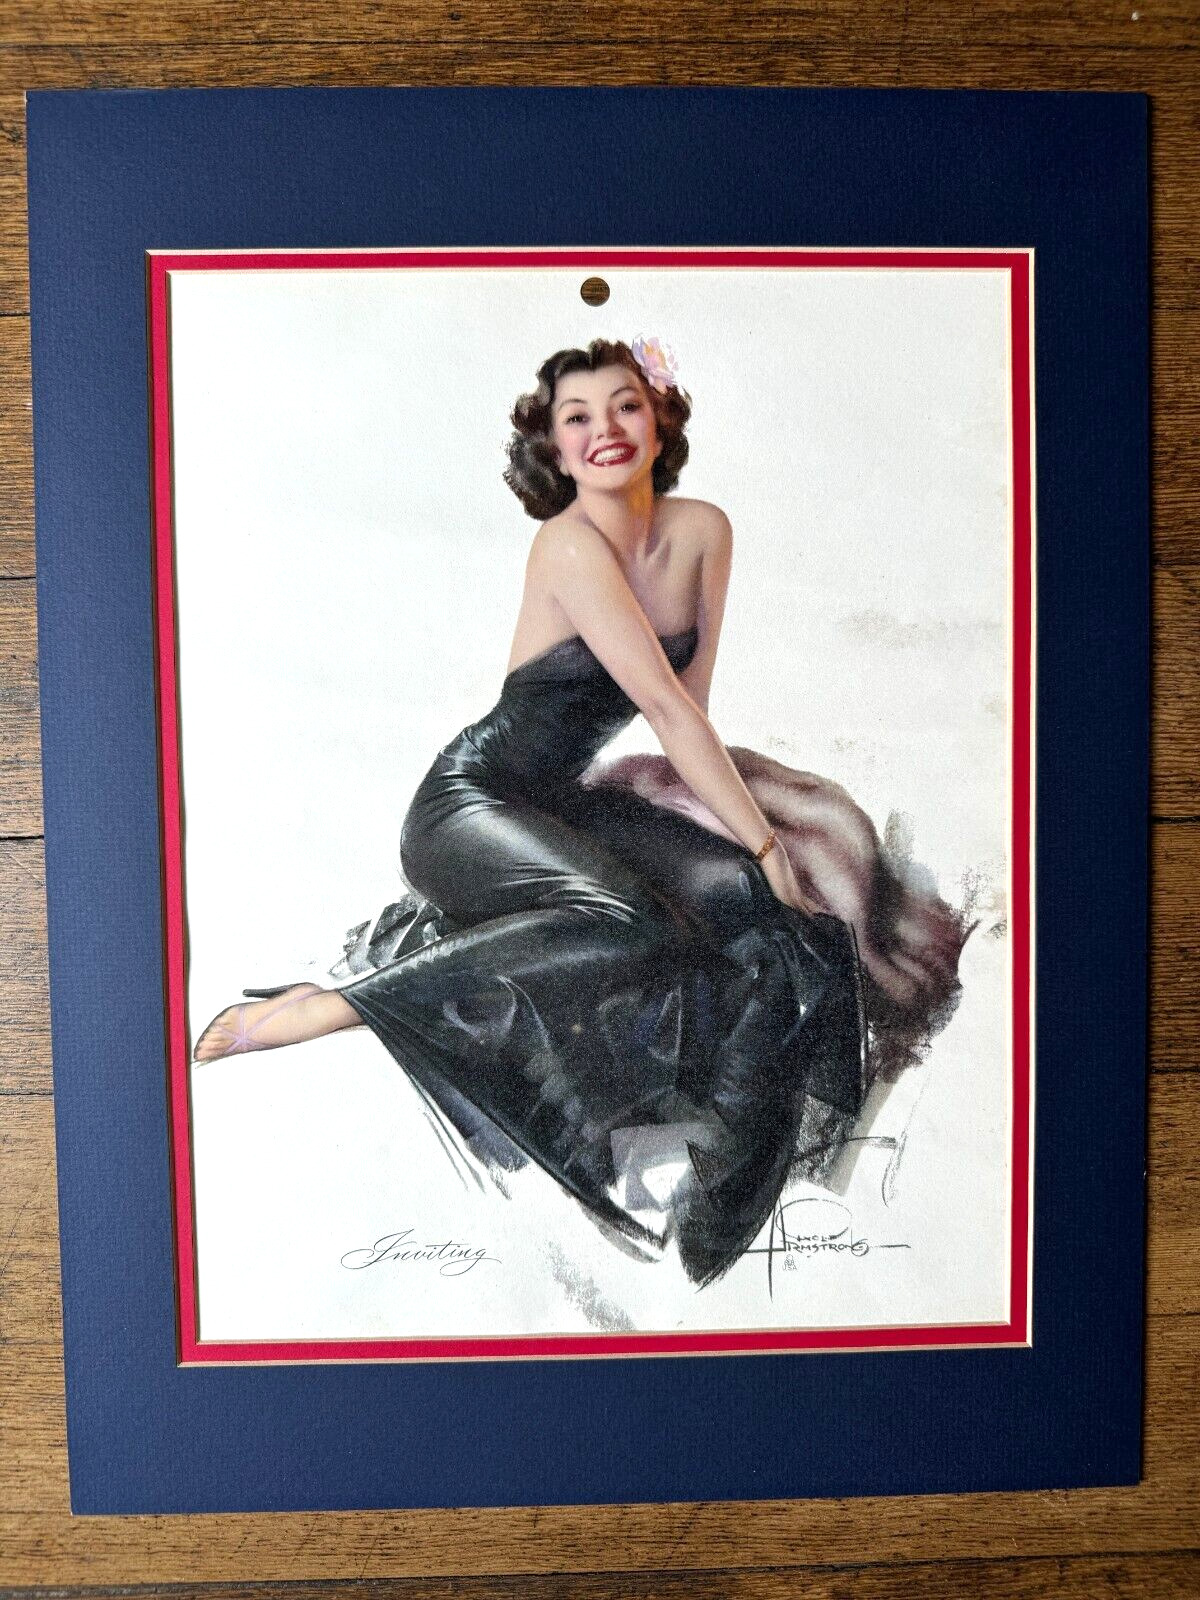 Beautiful Original 1940's Pinup Girl Picture Matted Inviting by Rolf Armstrong